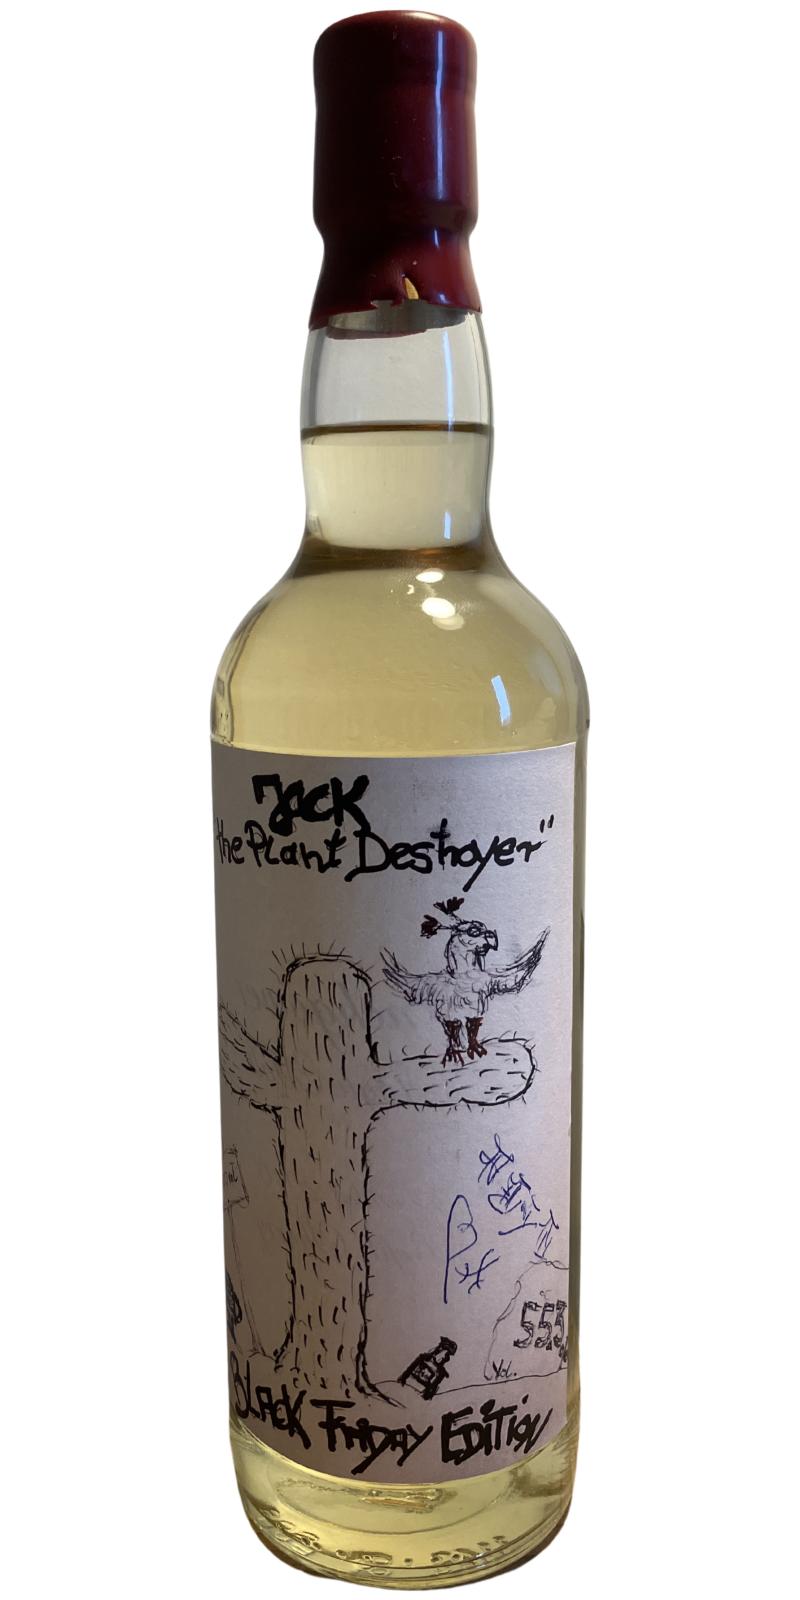 Jack the Plant Destroyer Black Friday Edition Refill Sherry 55.3% 700ml